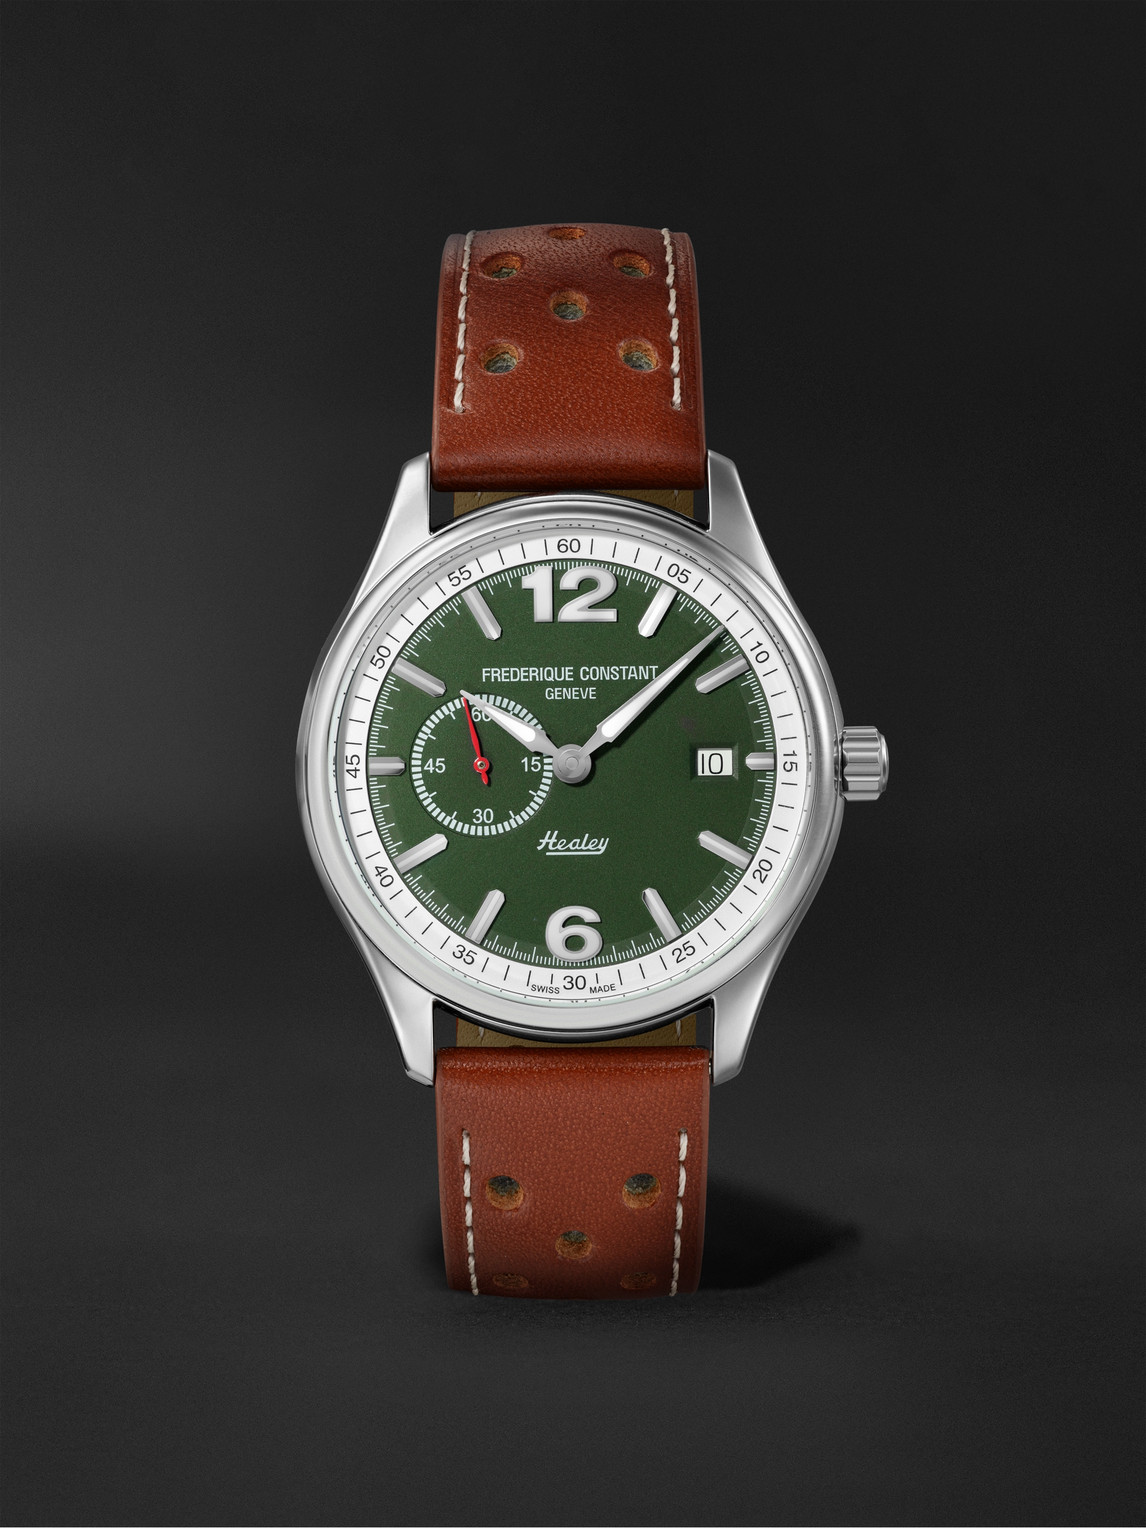 Frederique Constant Vintage Rally Healey Limited Edition Automatic 40mm Stainless Steel And Leather Watch, Ref No. Fc-34 In Green/brown